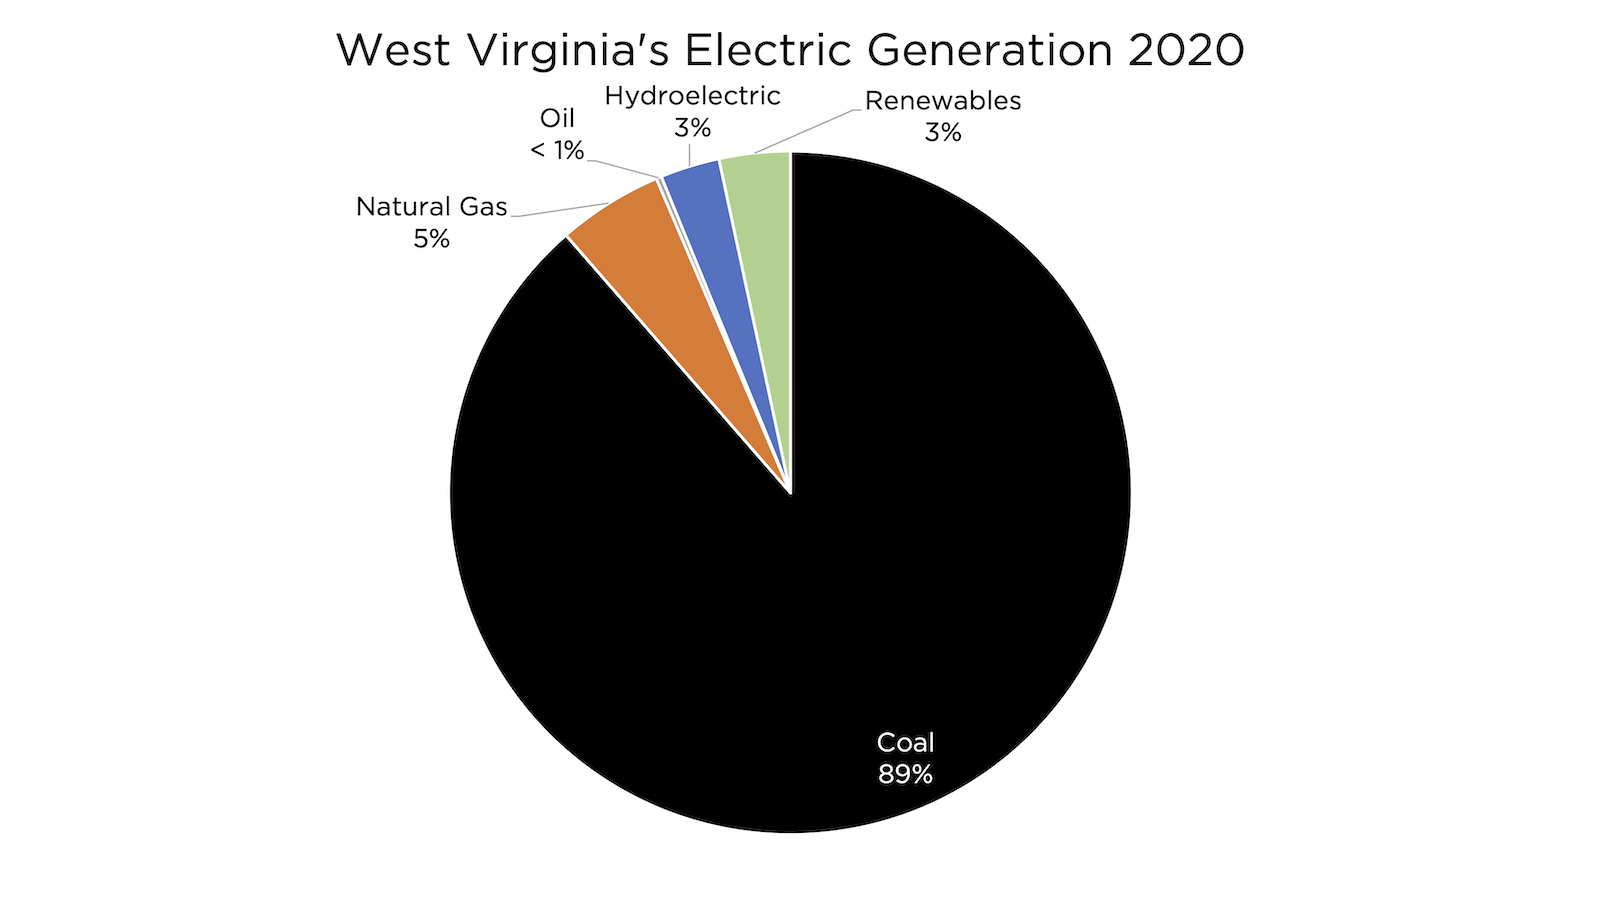 WV electricity mix